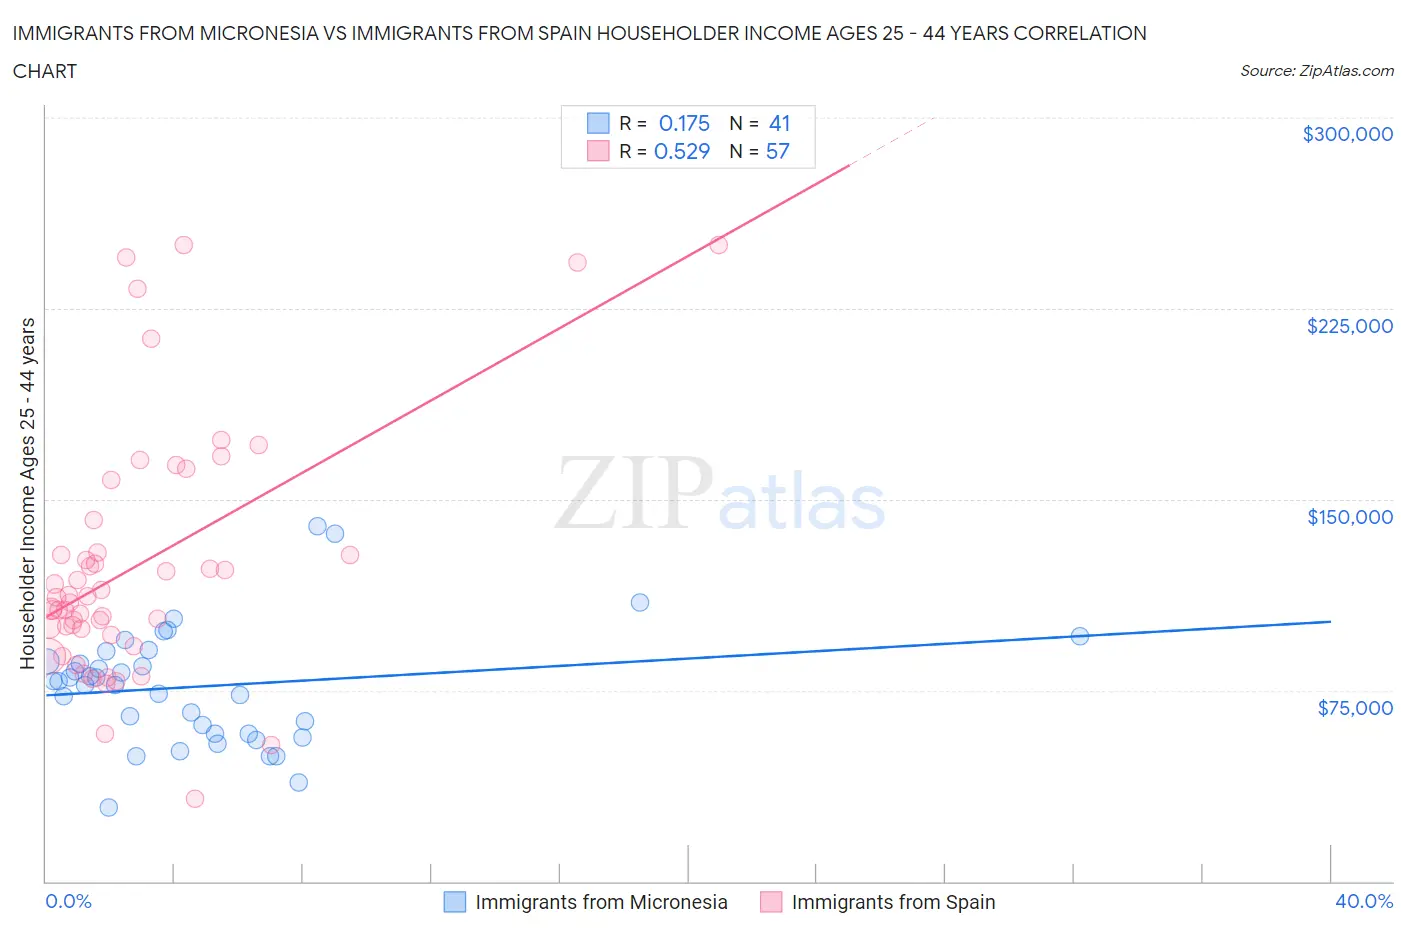 Immigrants from Micronesia vs Immigrants from Spain Householder Income Ages 25 - 44 years